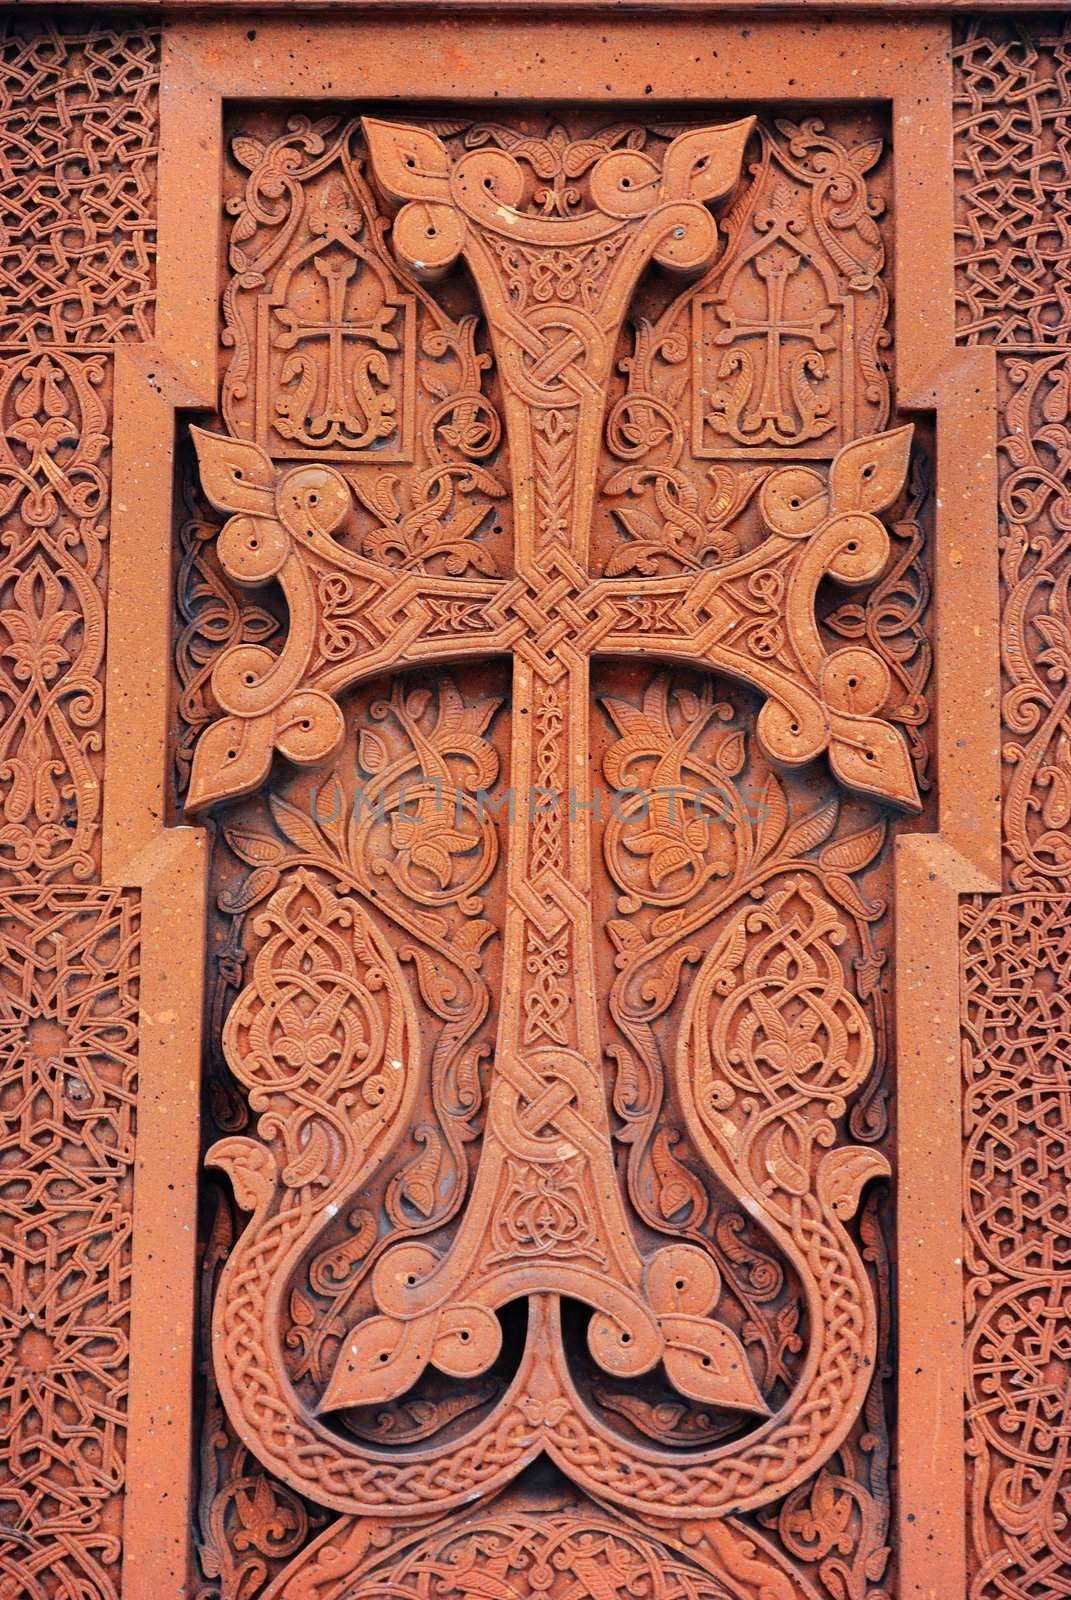 Architectural detail, part of a decor traditional ancient armenian decorative pattern